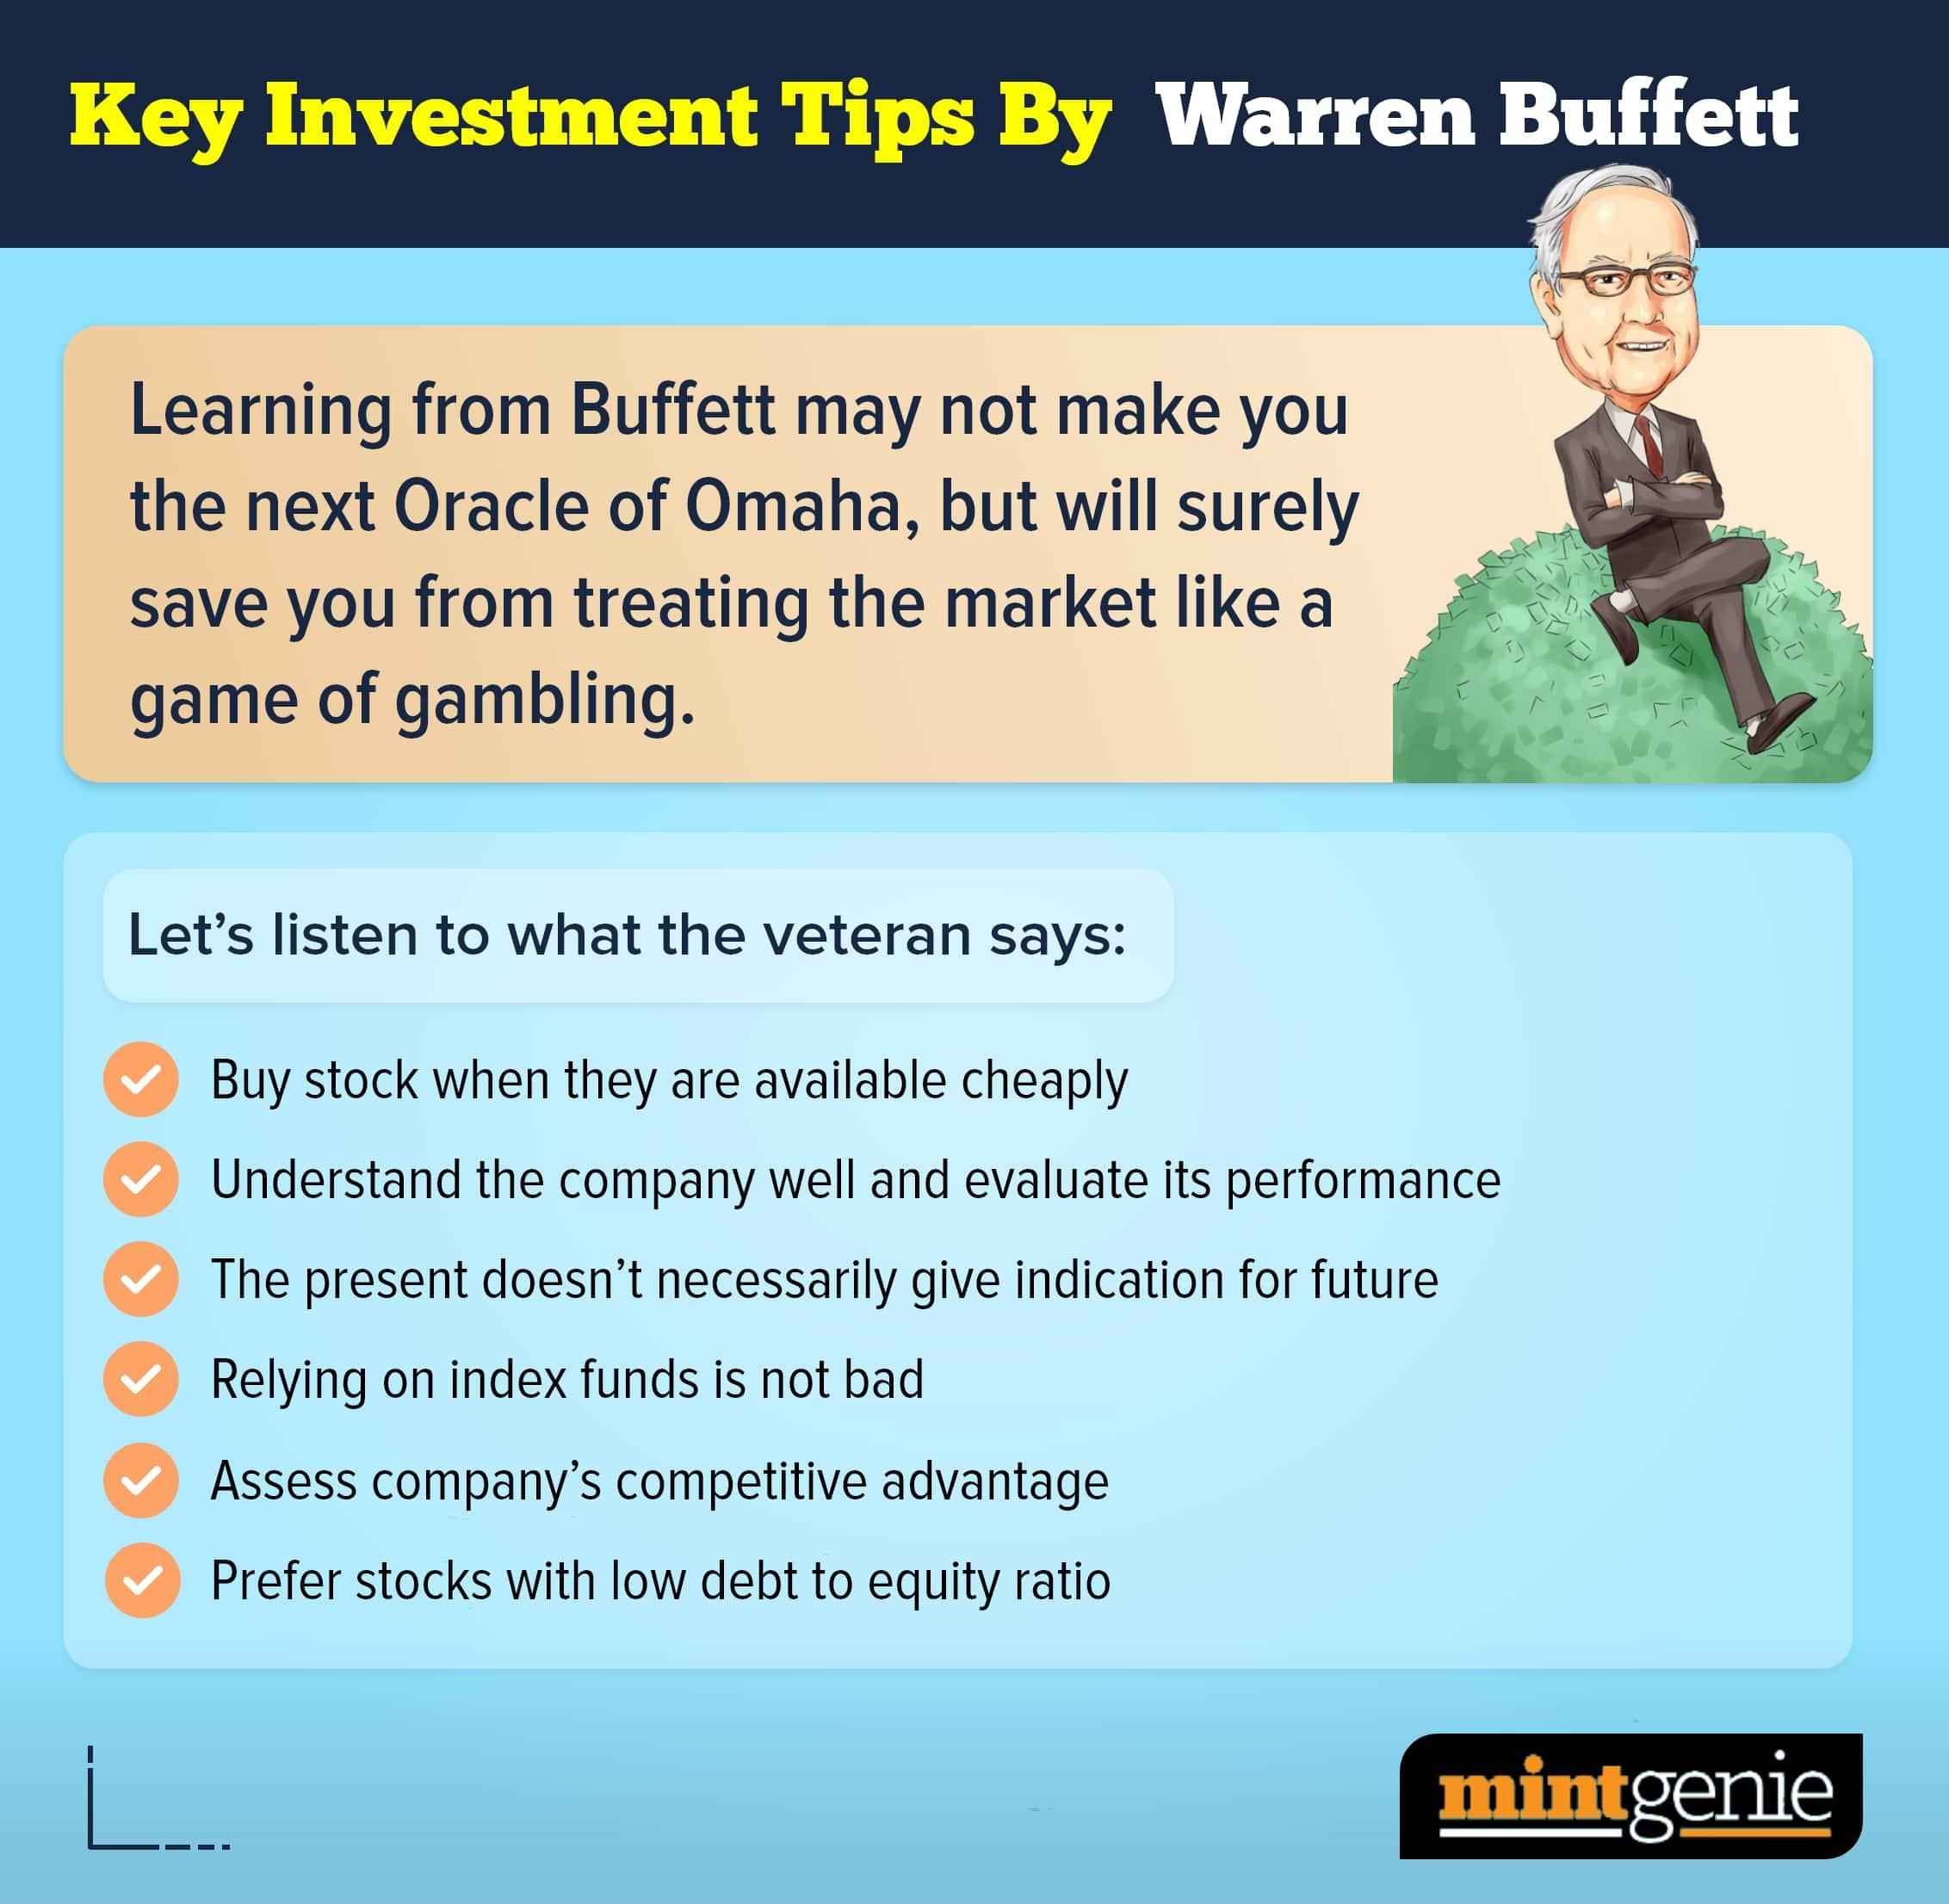 These are some of the investment tips shared by the legendary investor Warren Buffett.